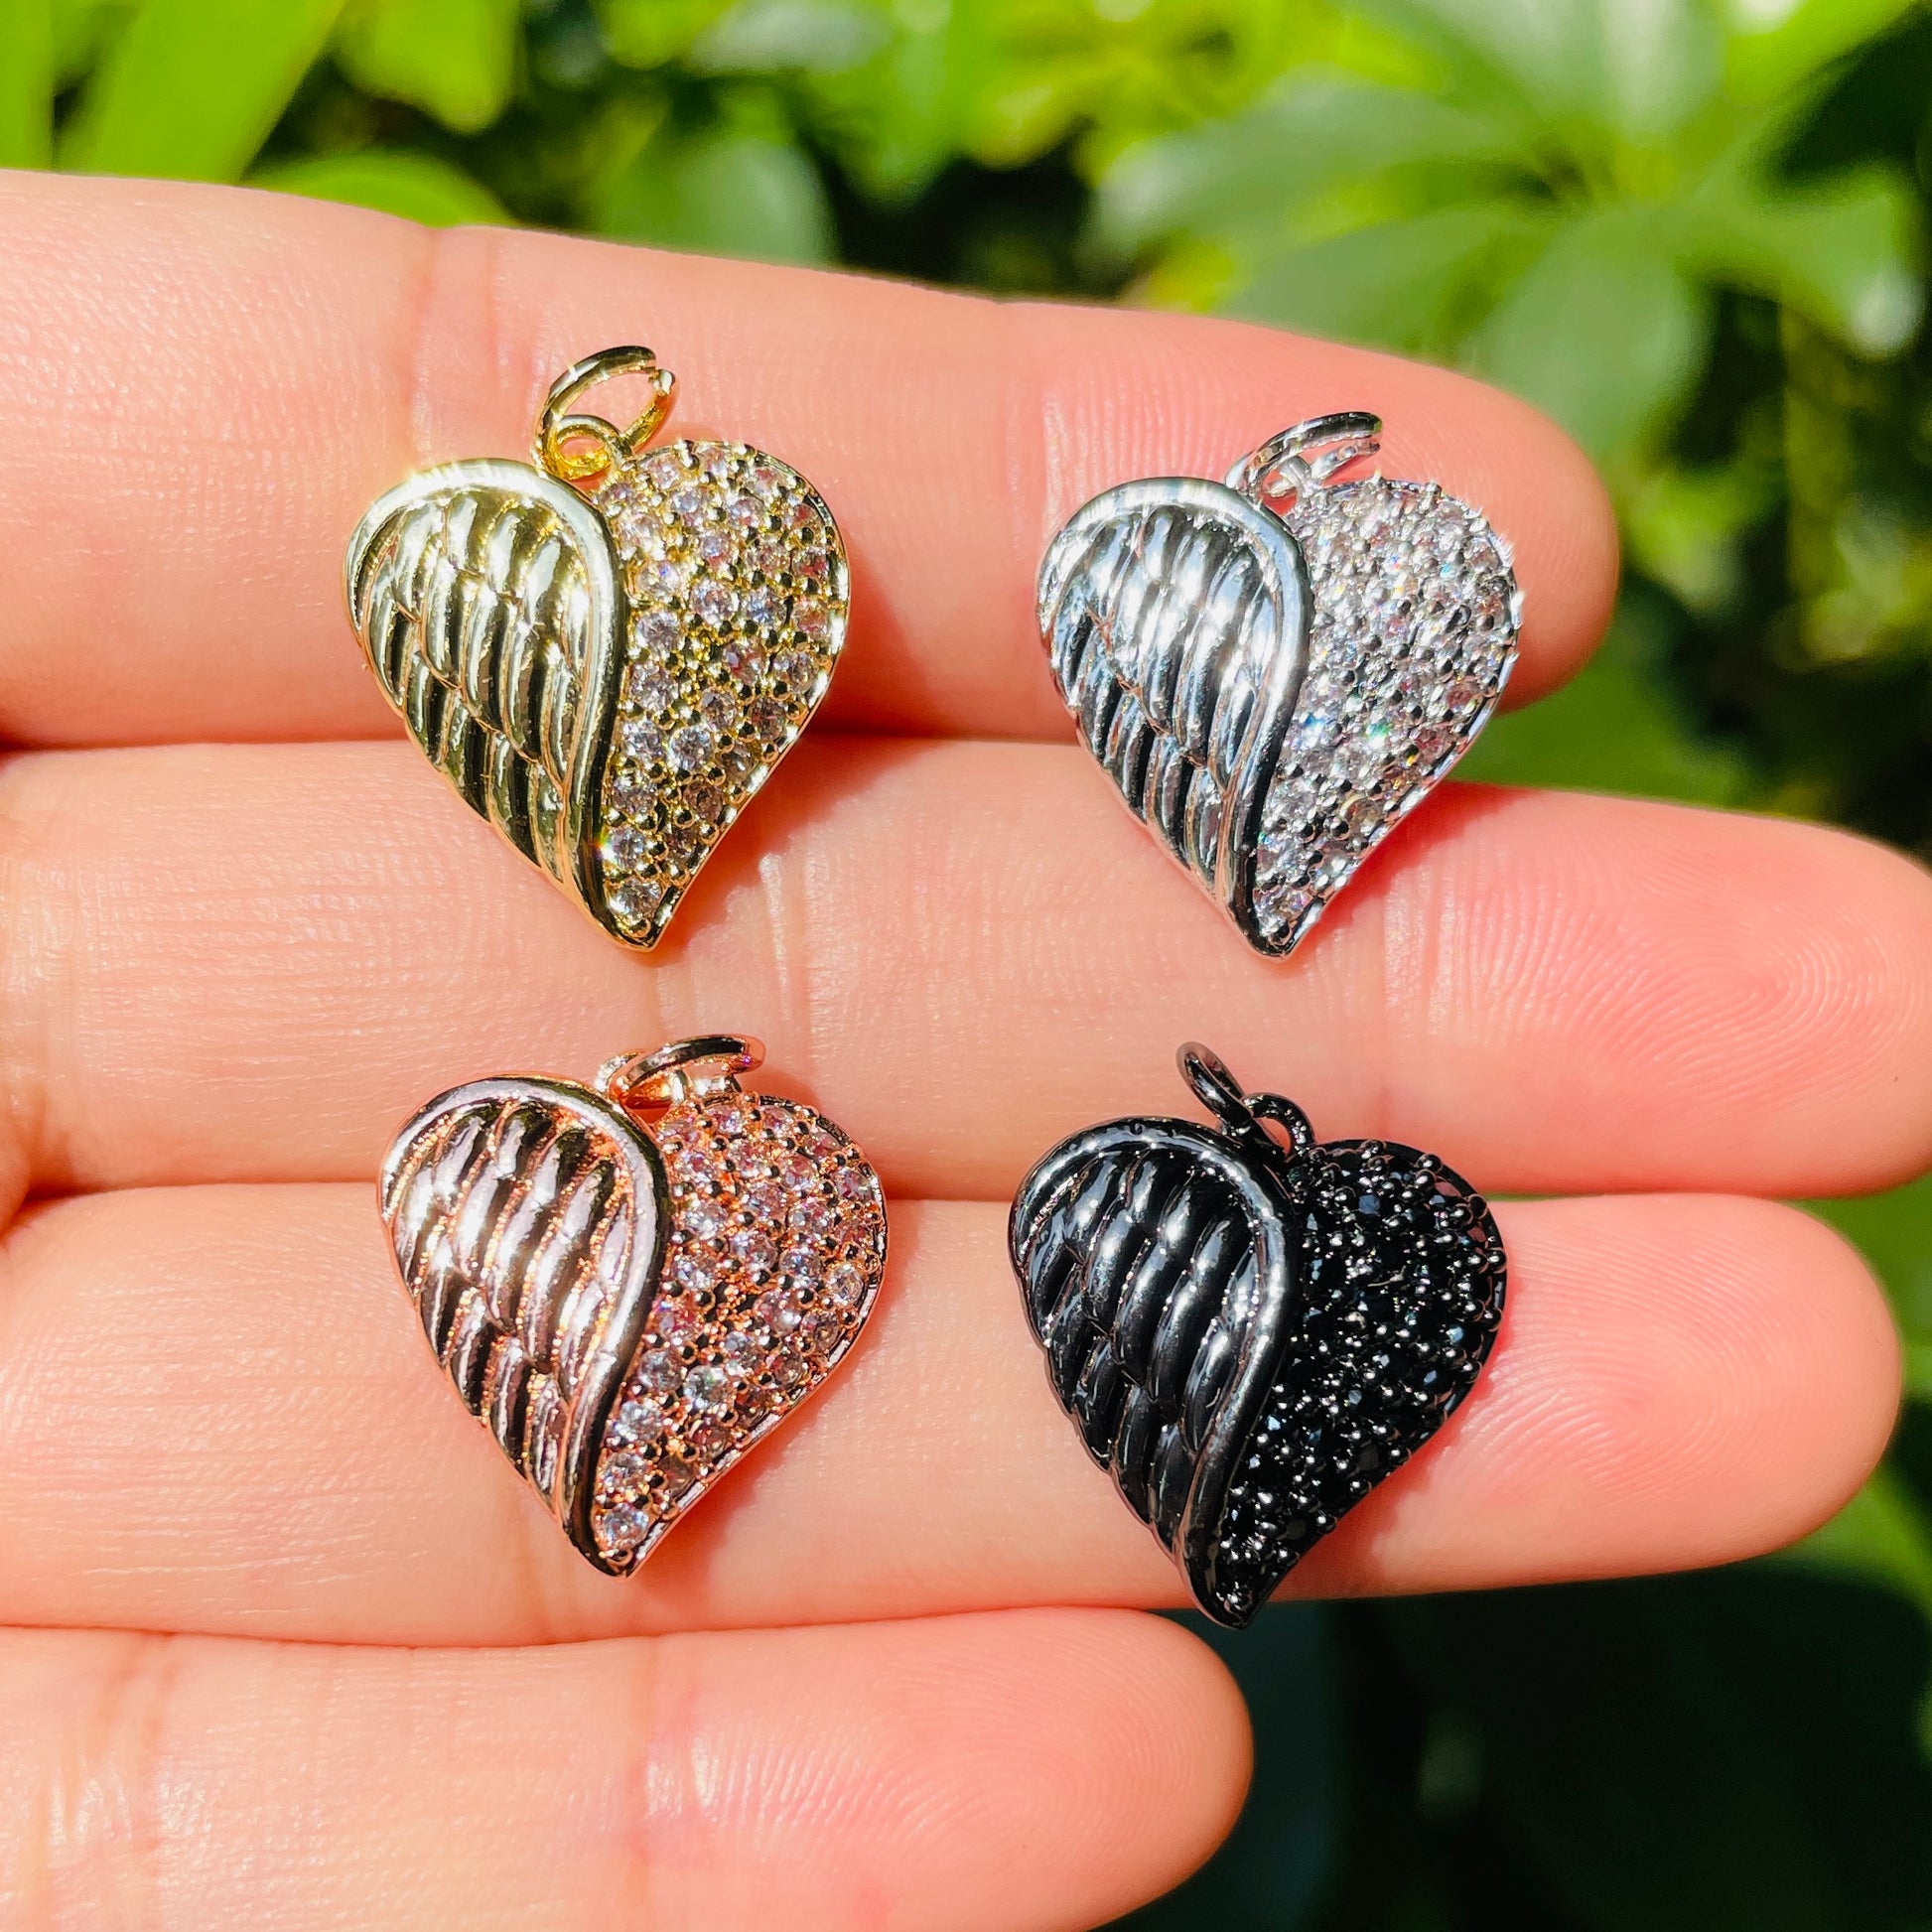 10pcs/lot 17.2*16mm Small Size CZ Paved Wing Heart Charms Mix Colors CZ Paved Charms Hearts New Charms Arrivals Charms Beads Beyond